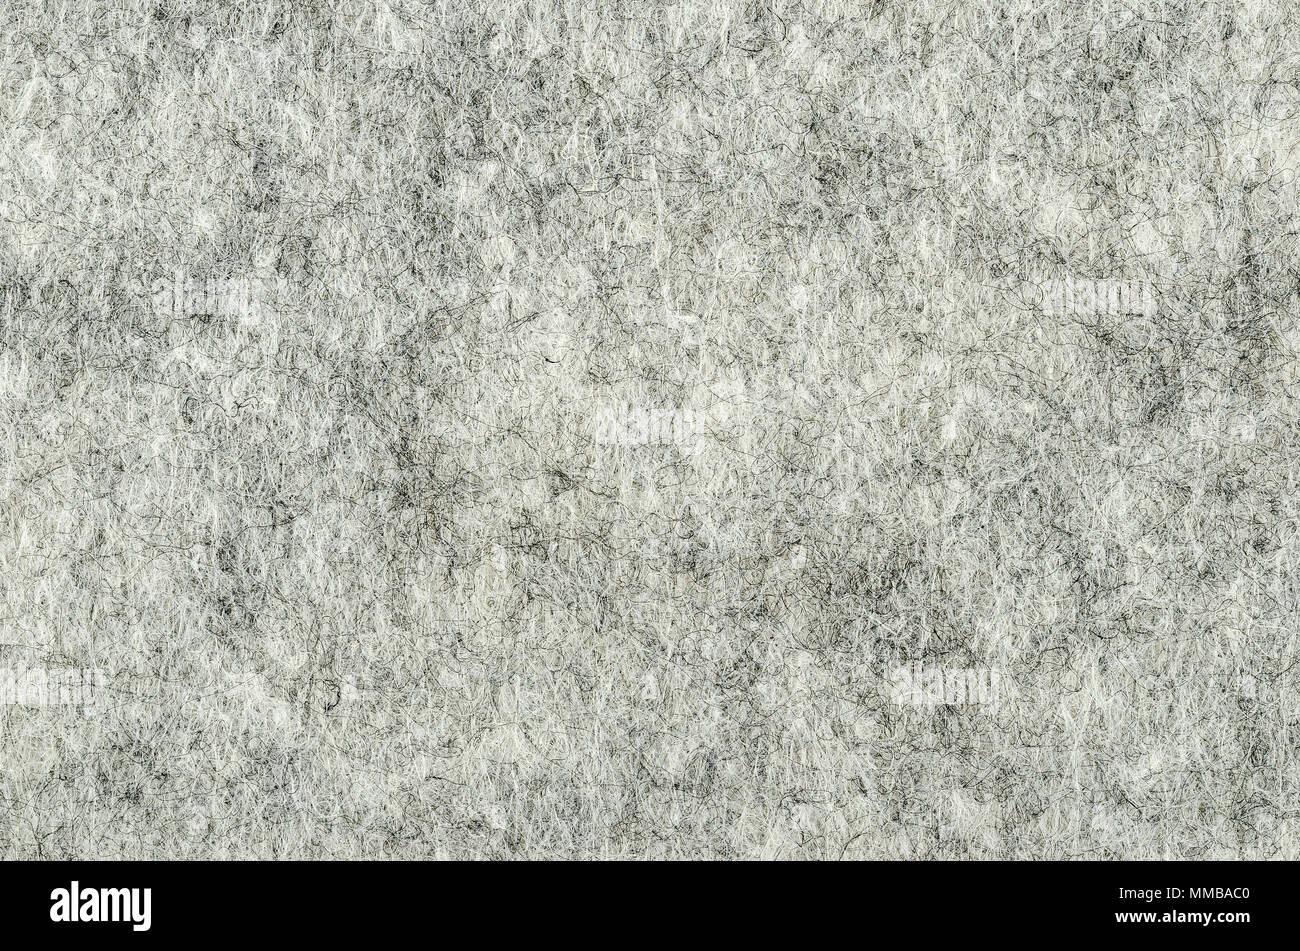 Gray felt surface. Textile material, made of matted synthetic fibers. White, gray and black acrylic pressed together. Fabric pattern. Background. Stock Photo